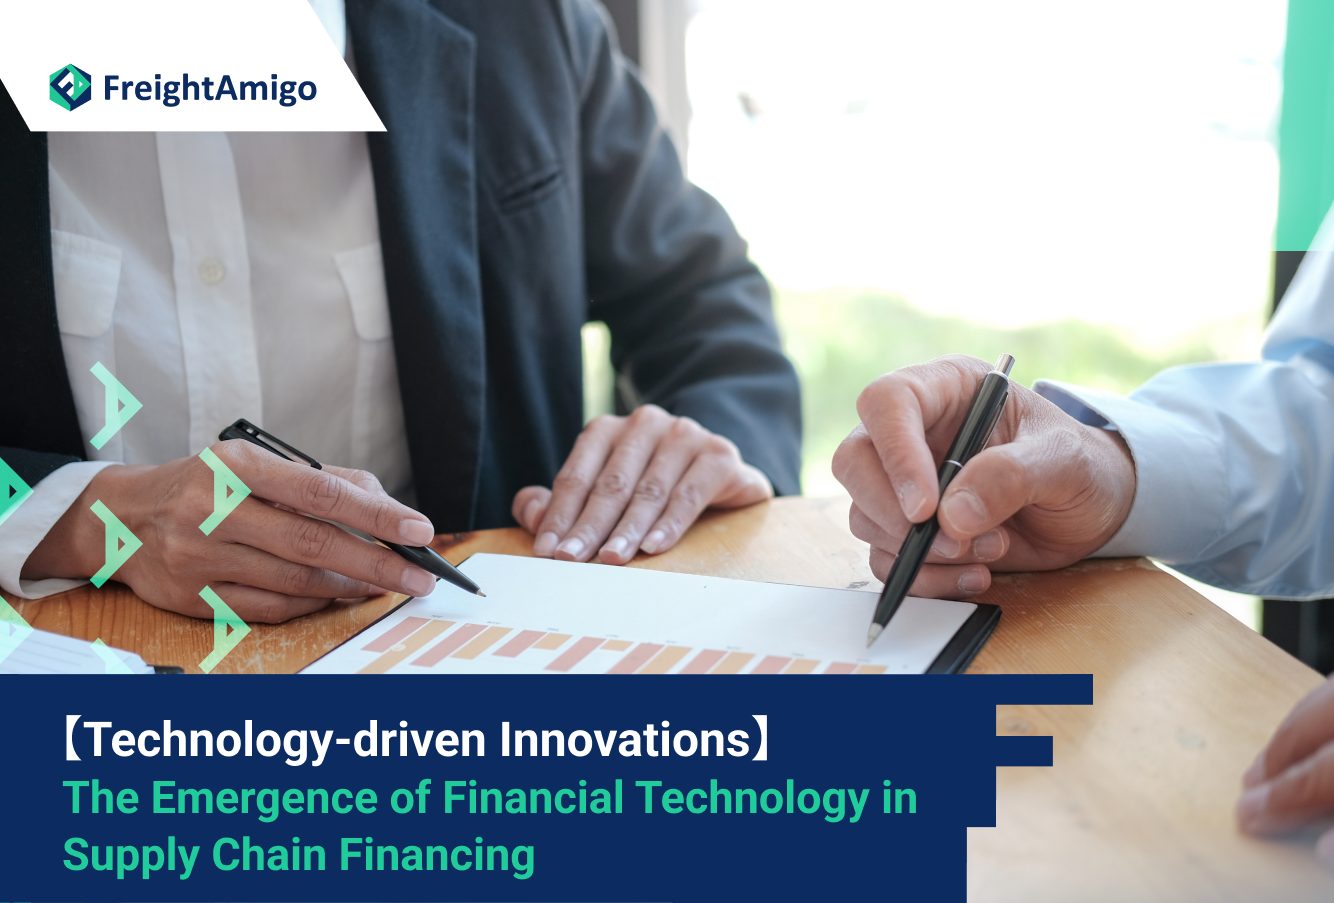 【Technology-driven Innovations】 The Emergence of Financial Technology in Supply Chain Financing